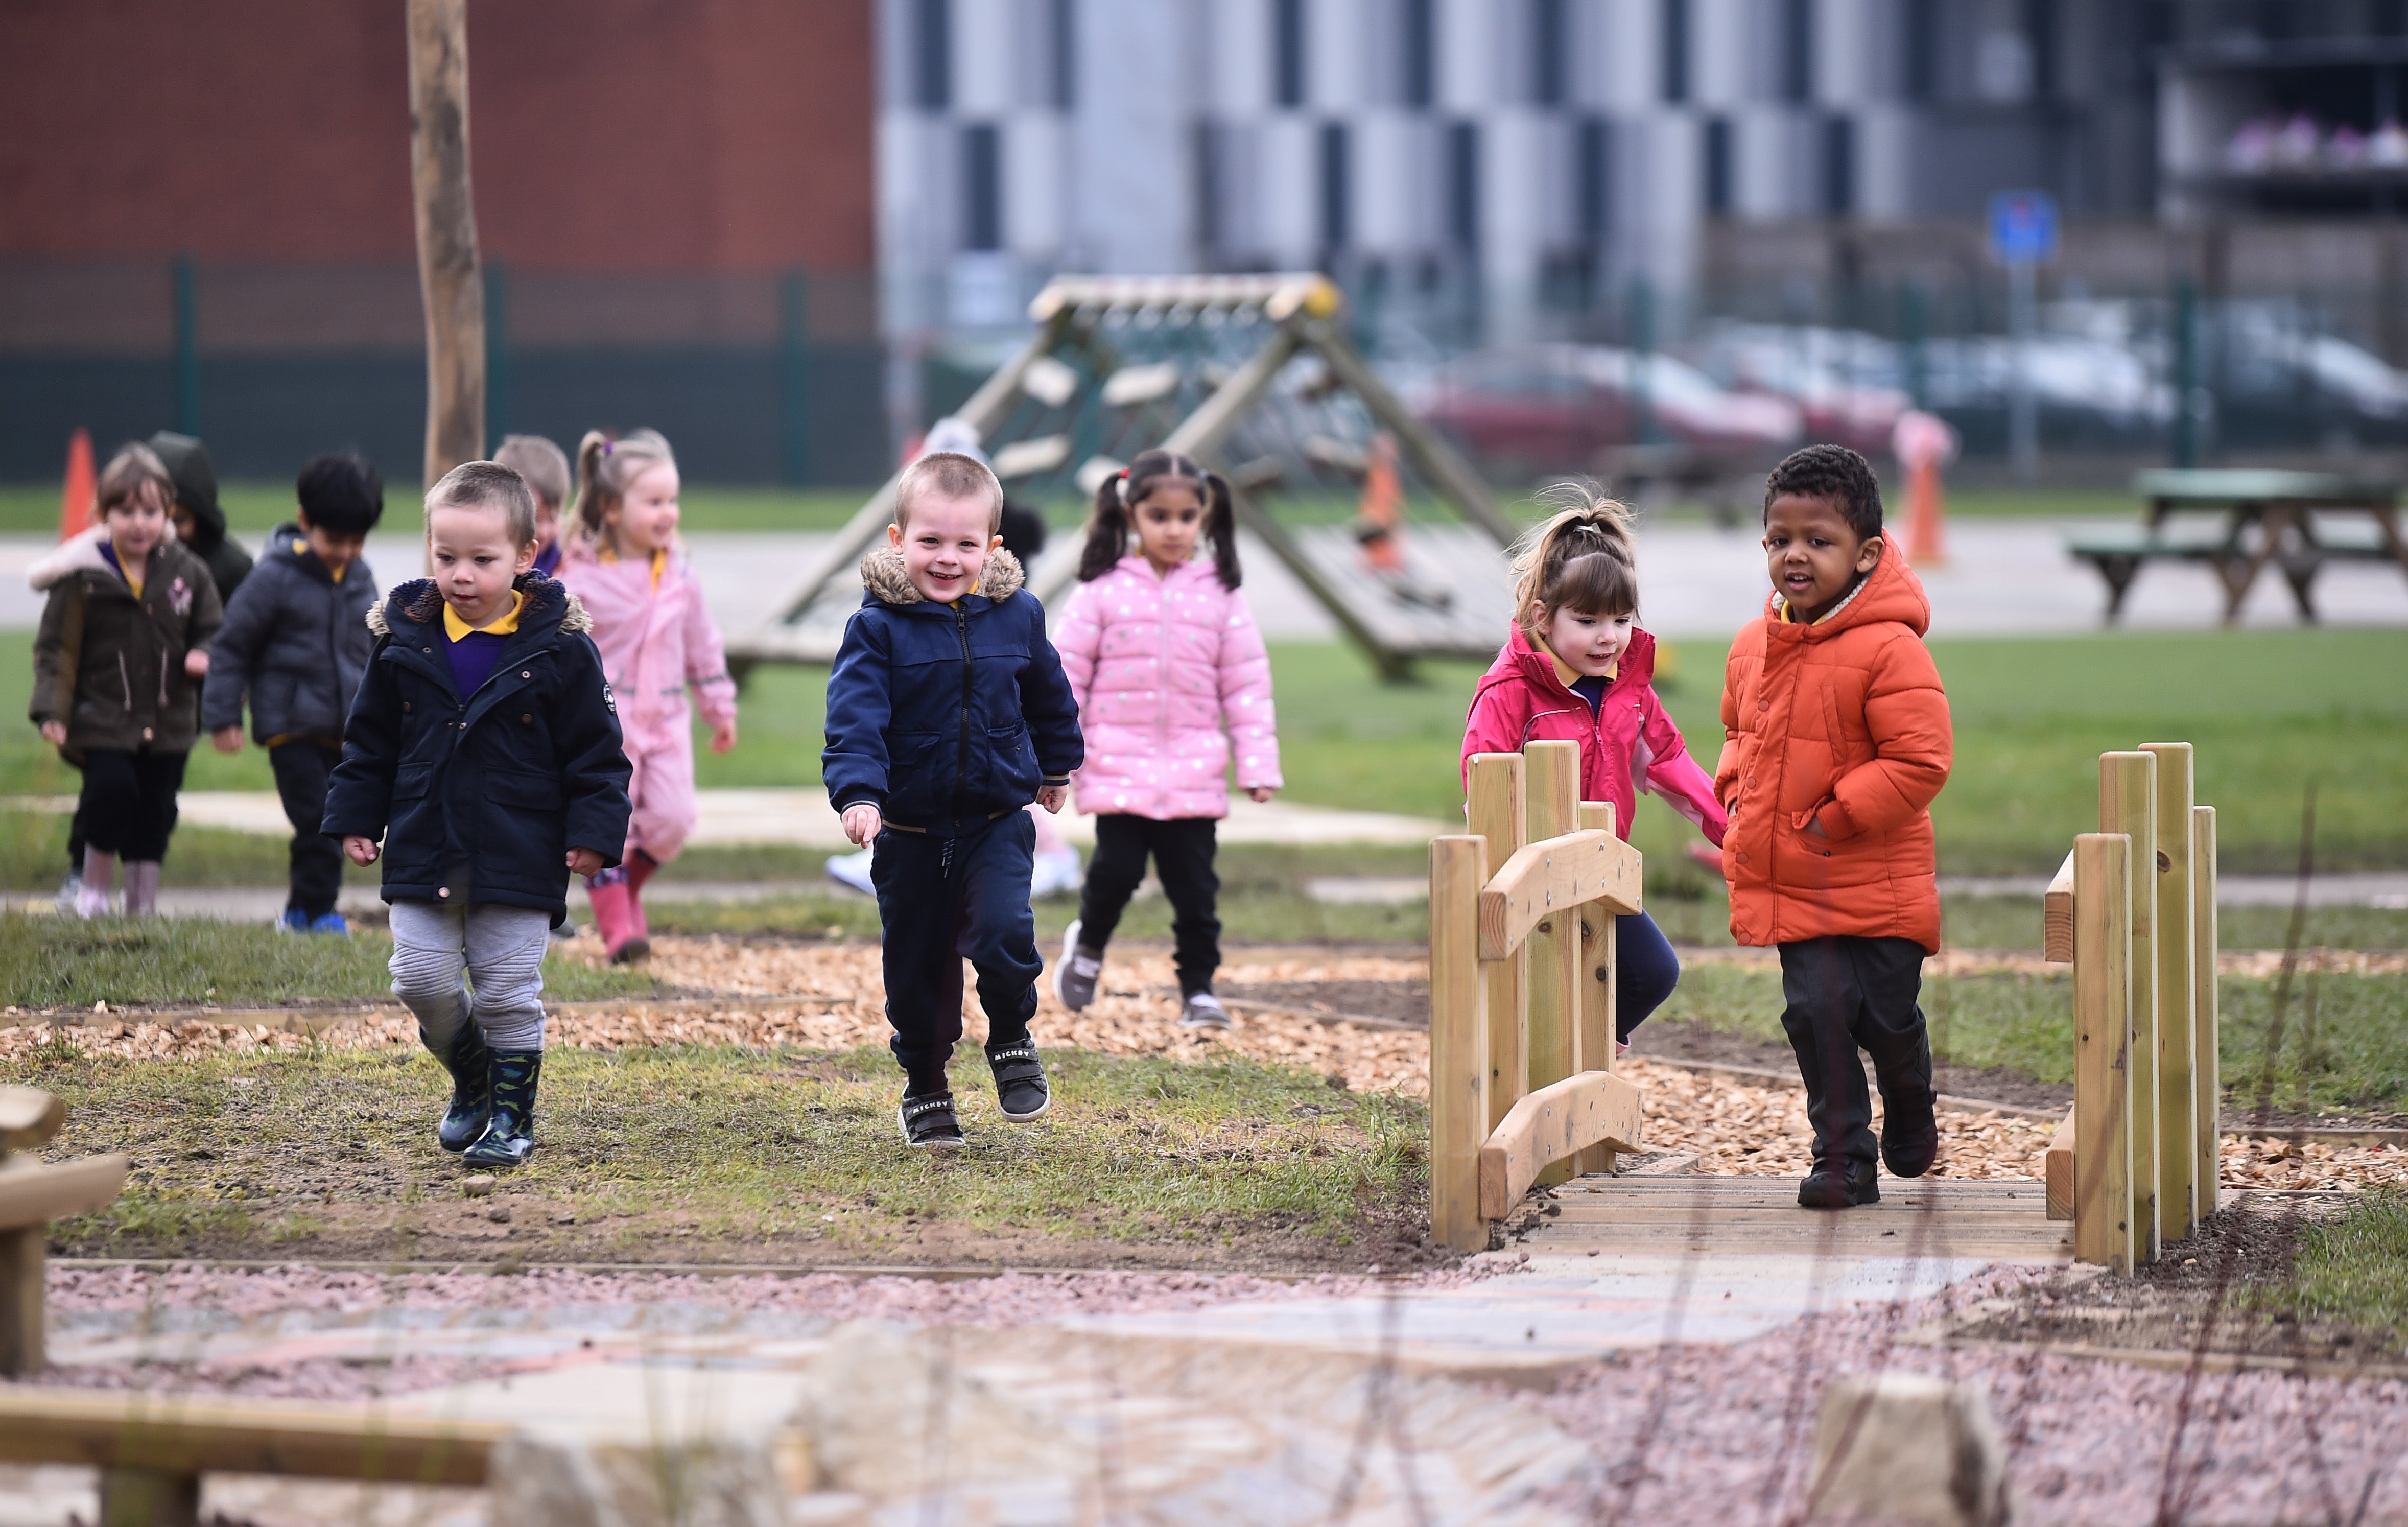 File: Children enjoy outside play at St Mary’s CE Primary School on 8 March 2021 in Stoke on Trent, England